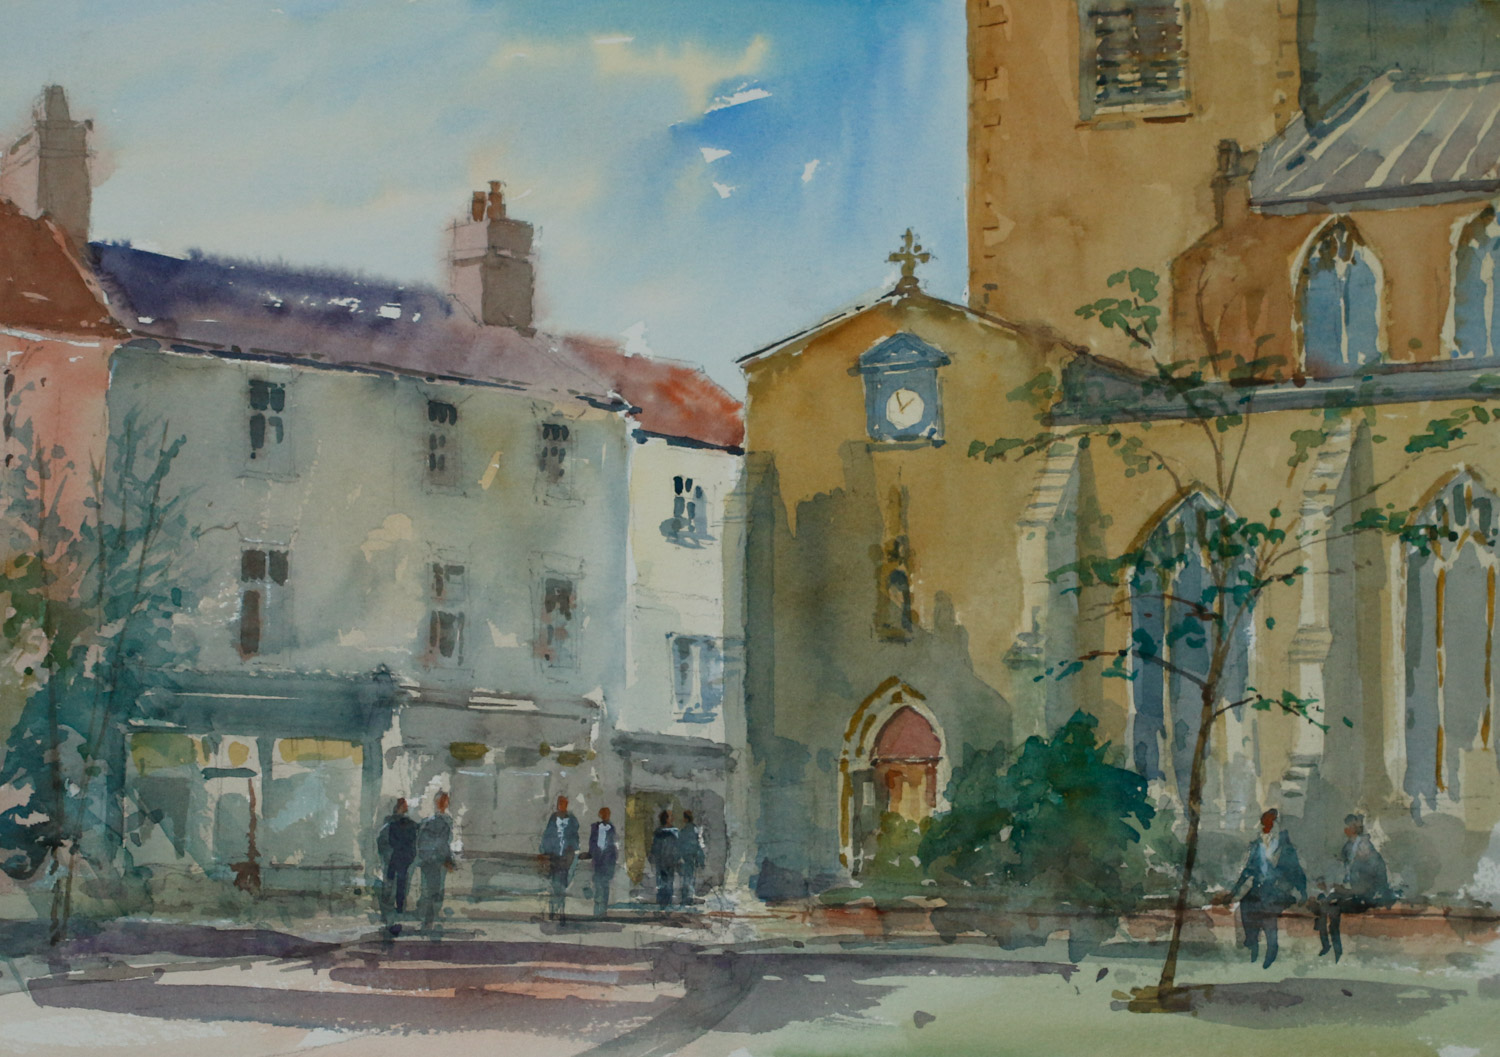 Artist Douglas Boyd Cross - St Gregory's, £250 12x16 Watercolour on Paper at Paint Out Norwich 2015